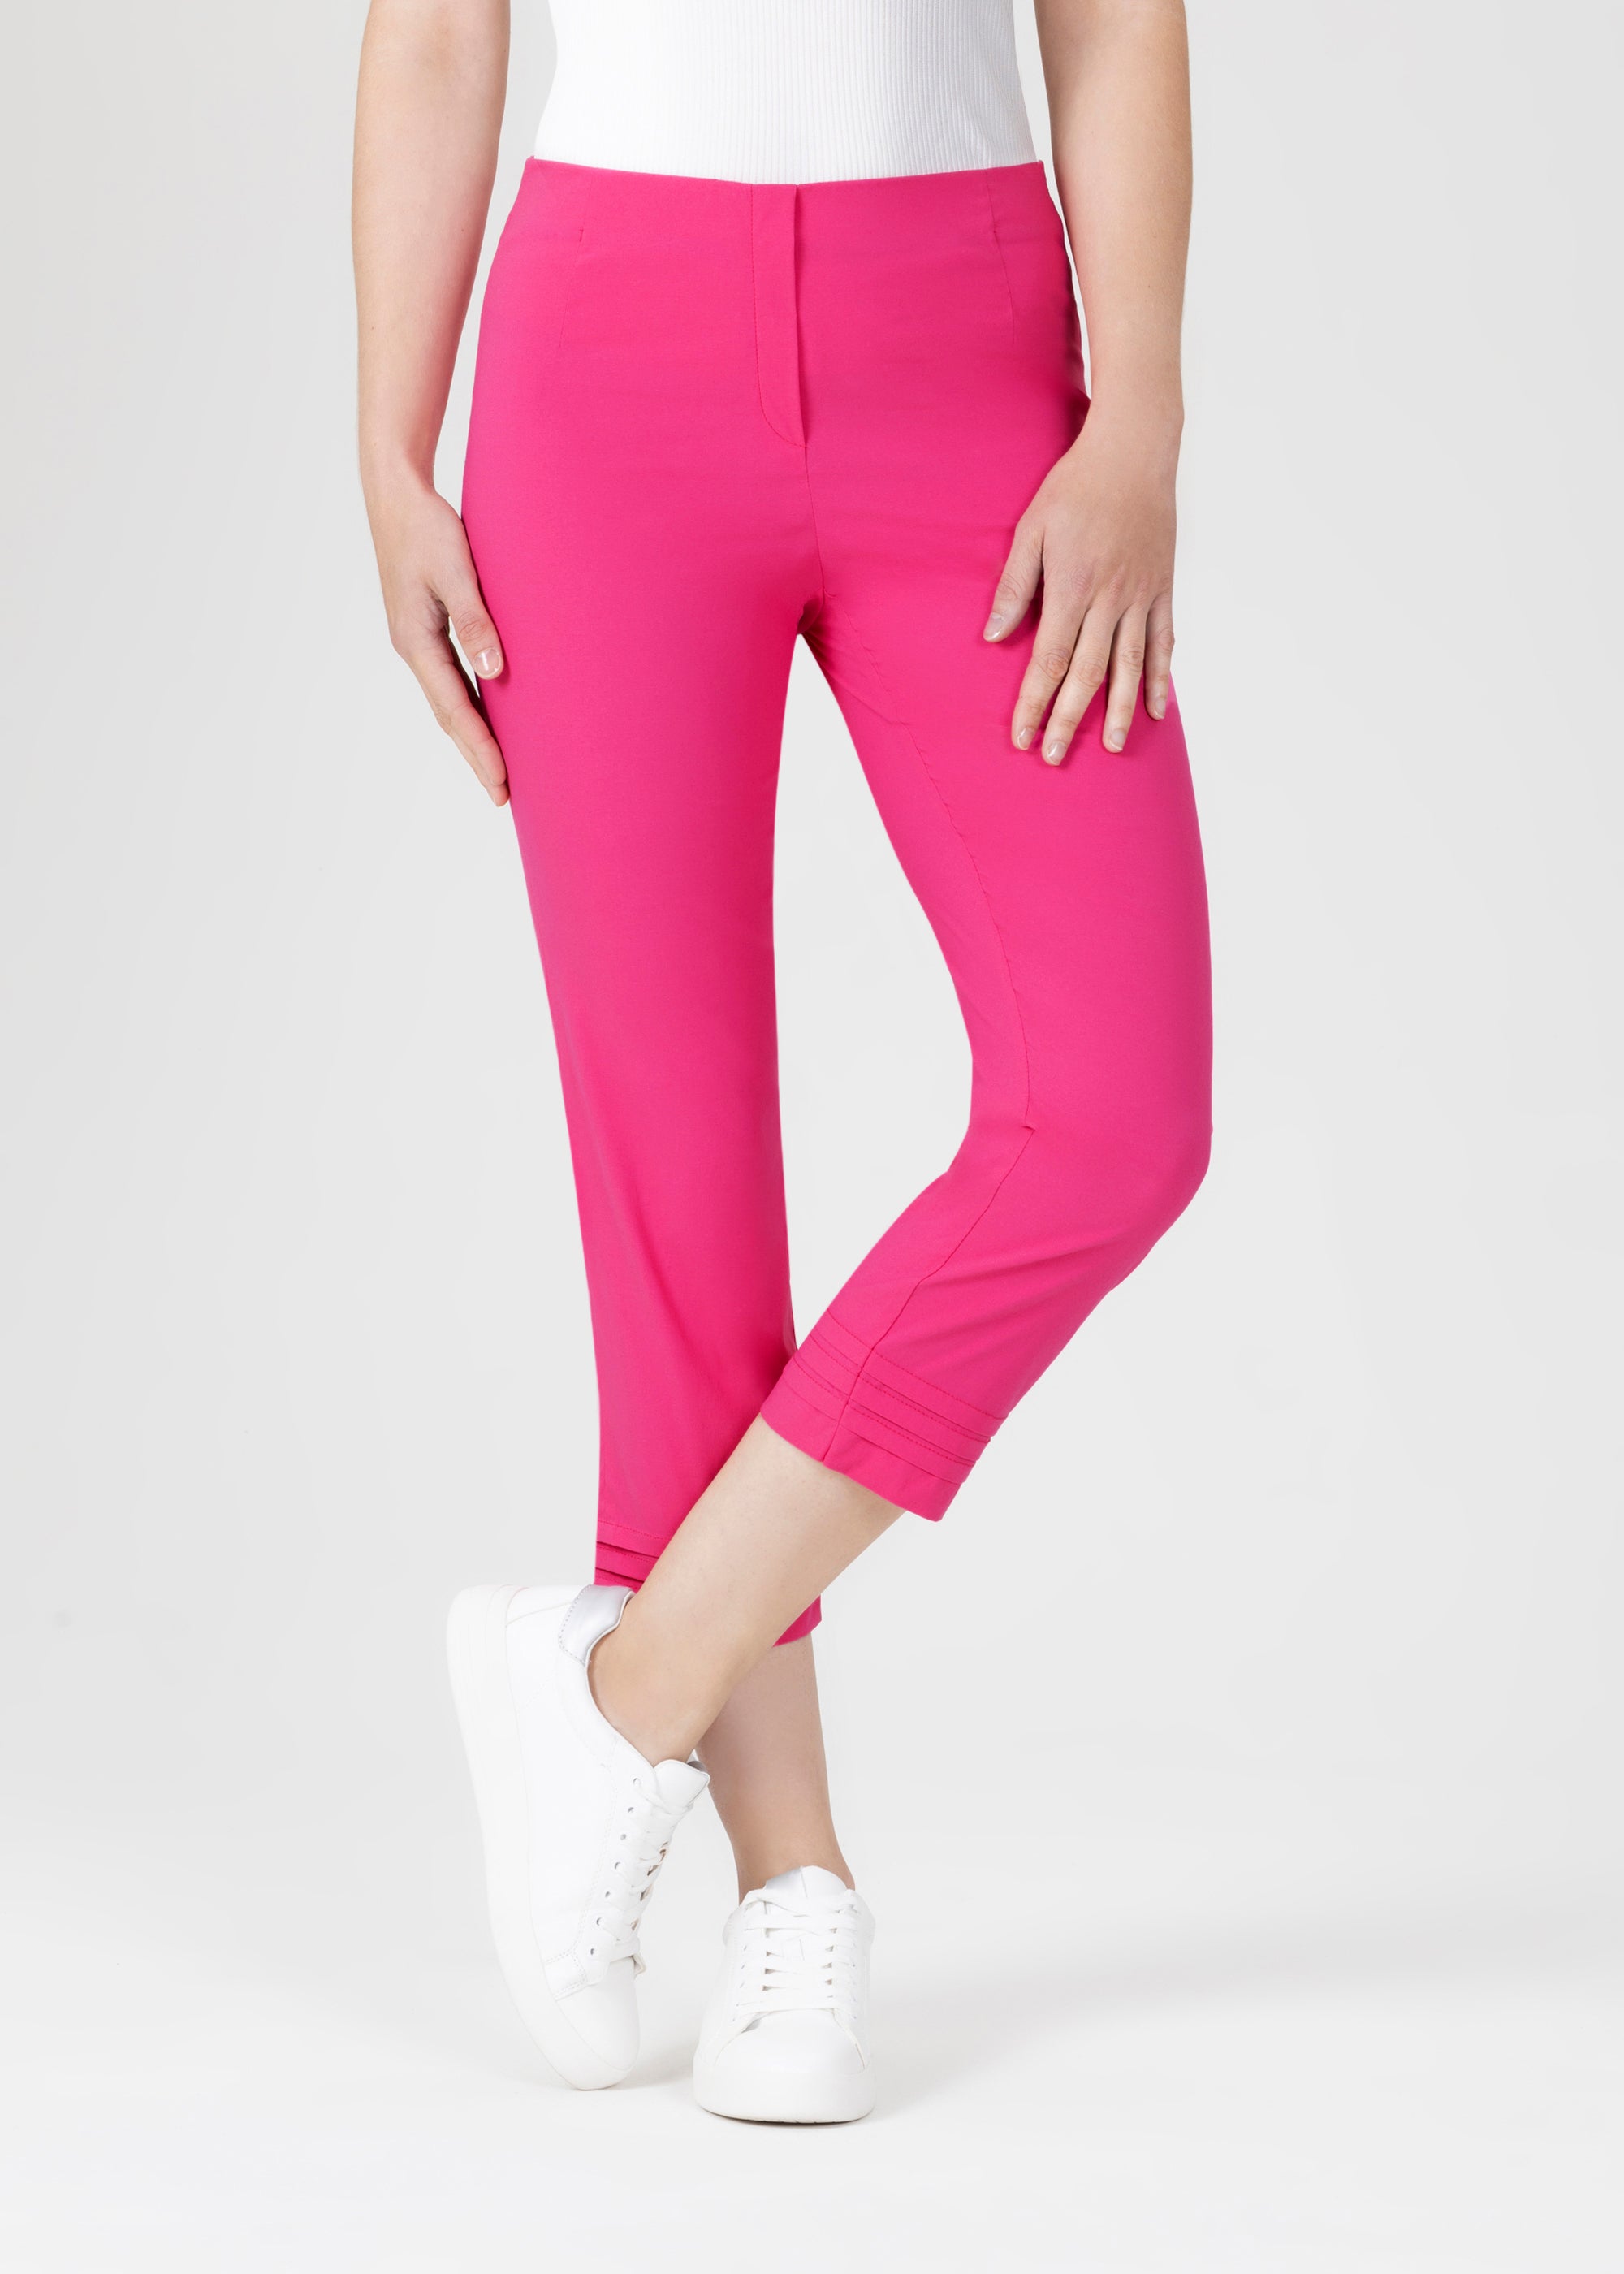 6/8-Hose Ina in Sommer Bengaline in pink – Stehmann-store.com | OFFICIAL  ONLINE SHOP